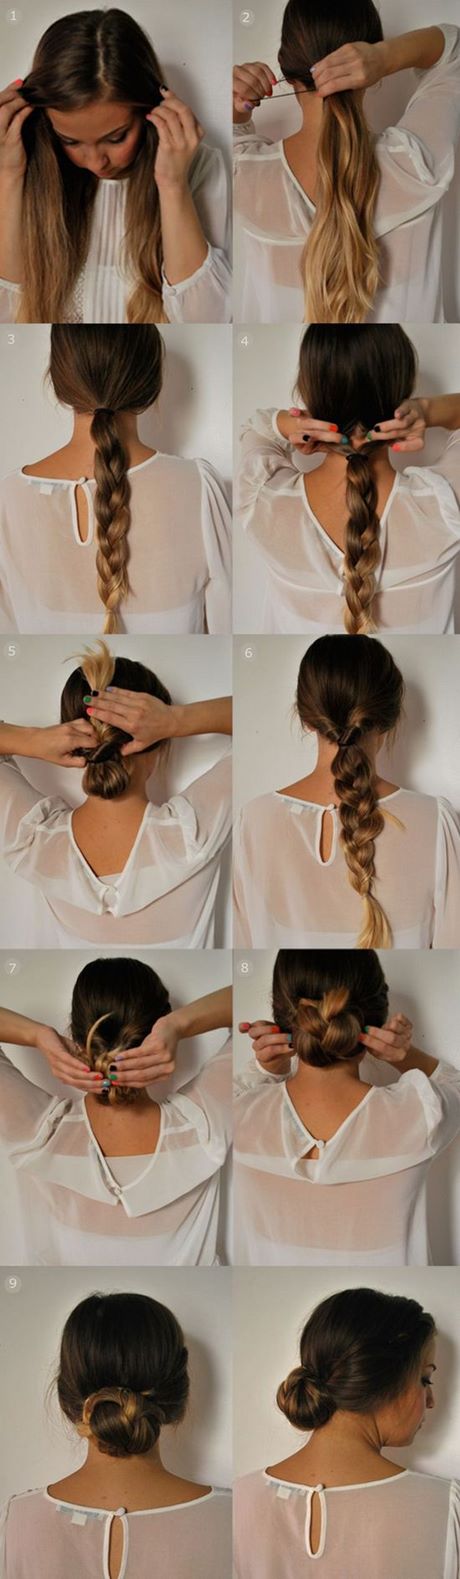 new-easy-hairstyle-for-girl-29 New easy hairstyle for girl